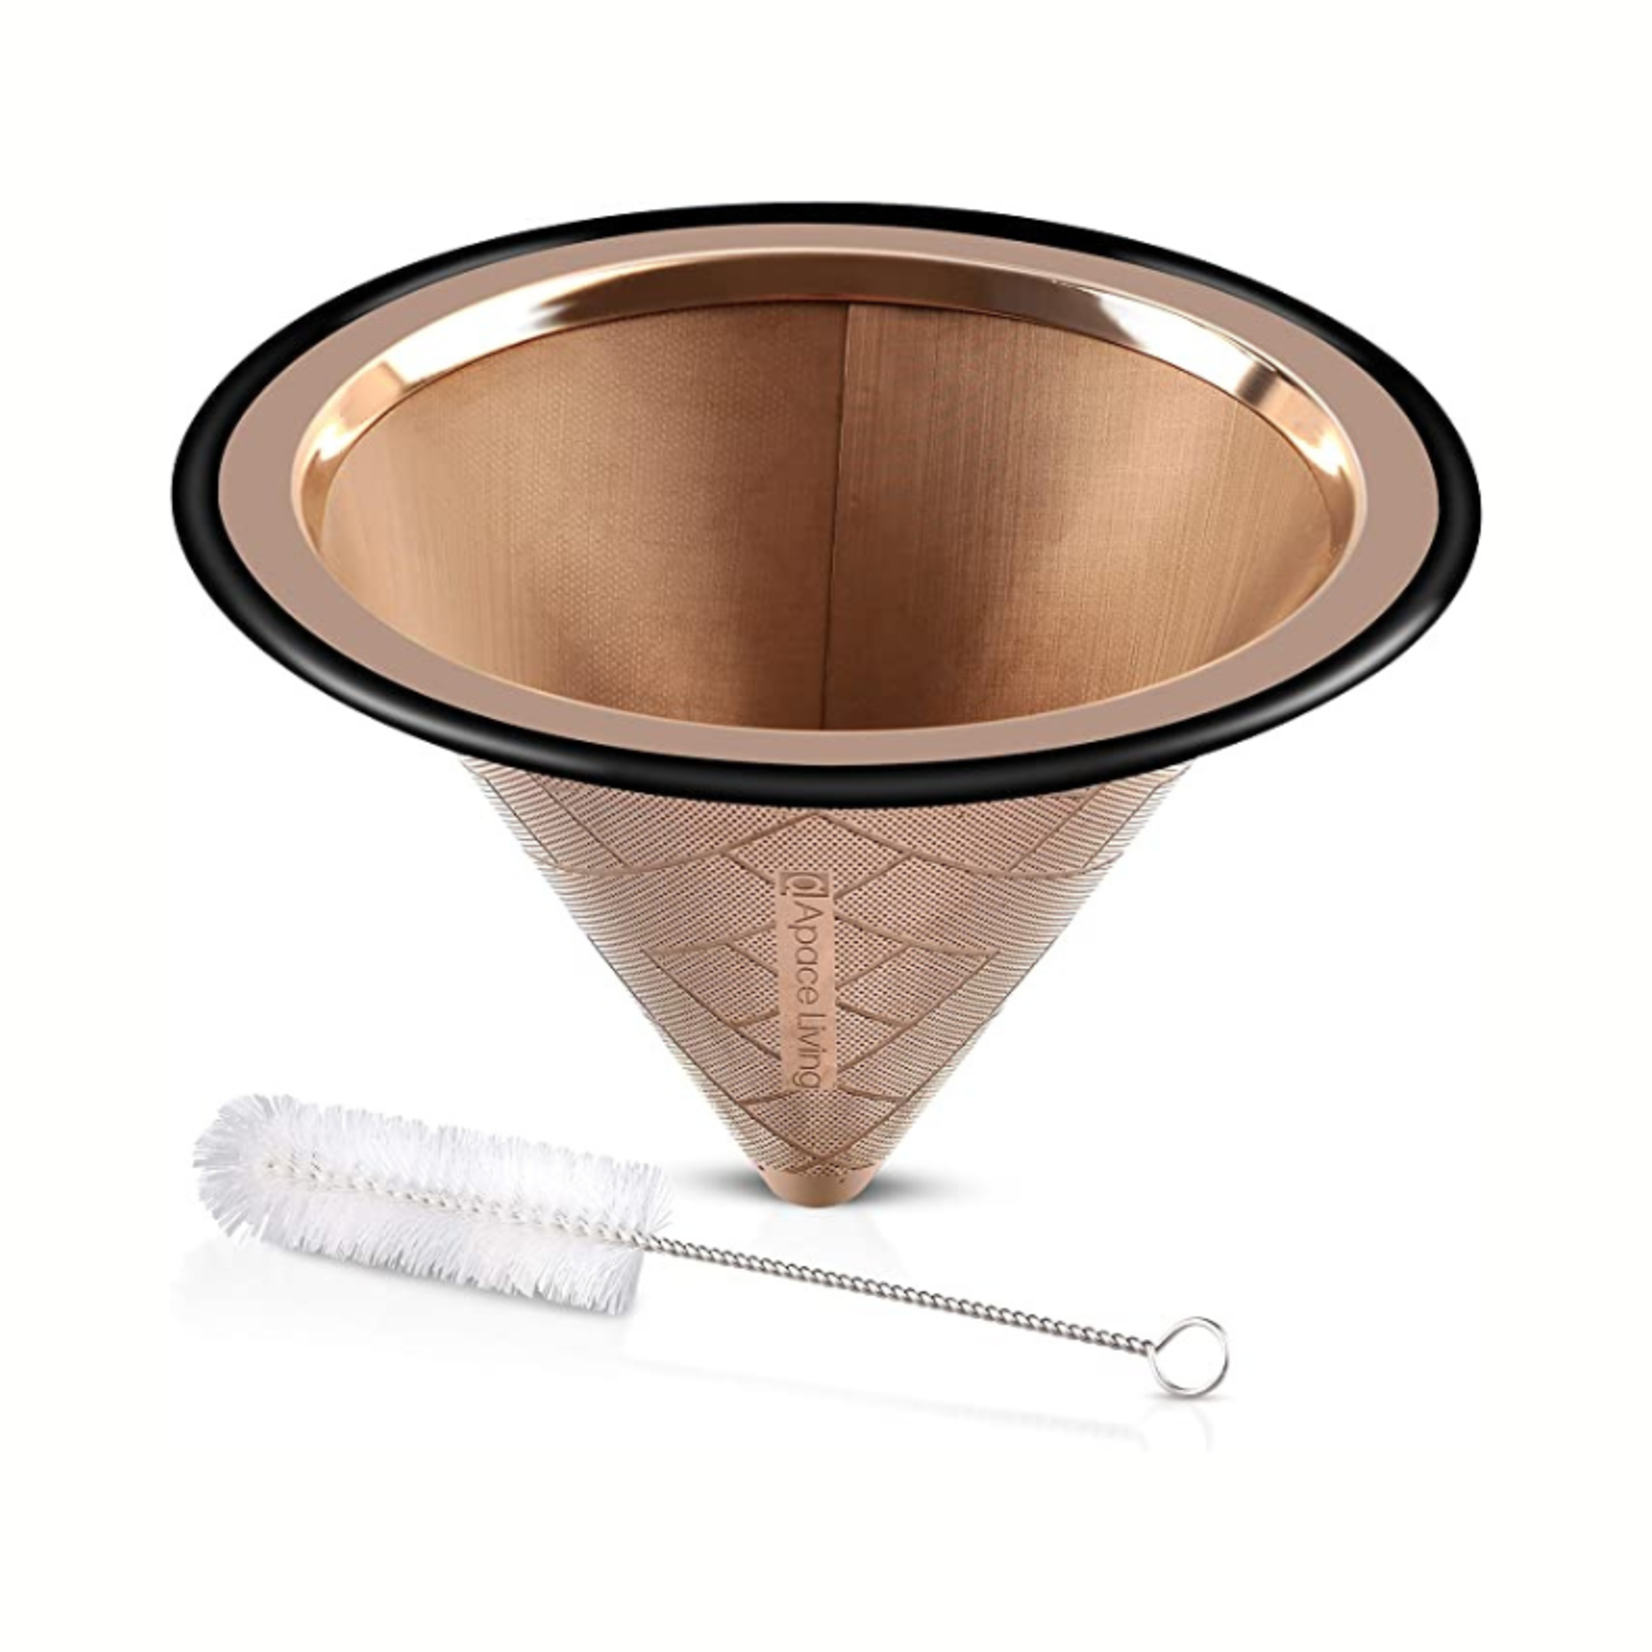 Paperless Coffee Filter- Stainless Steel- Titanium Copper